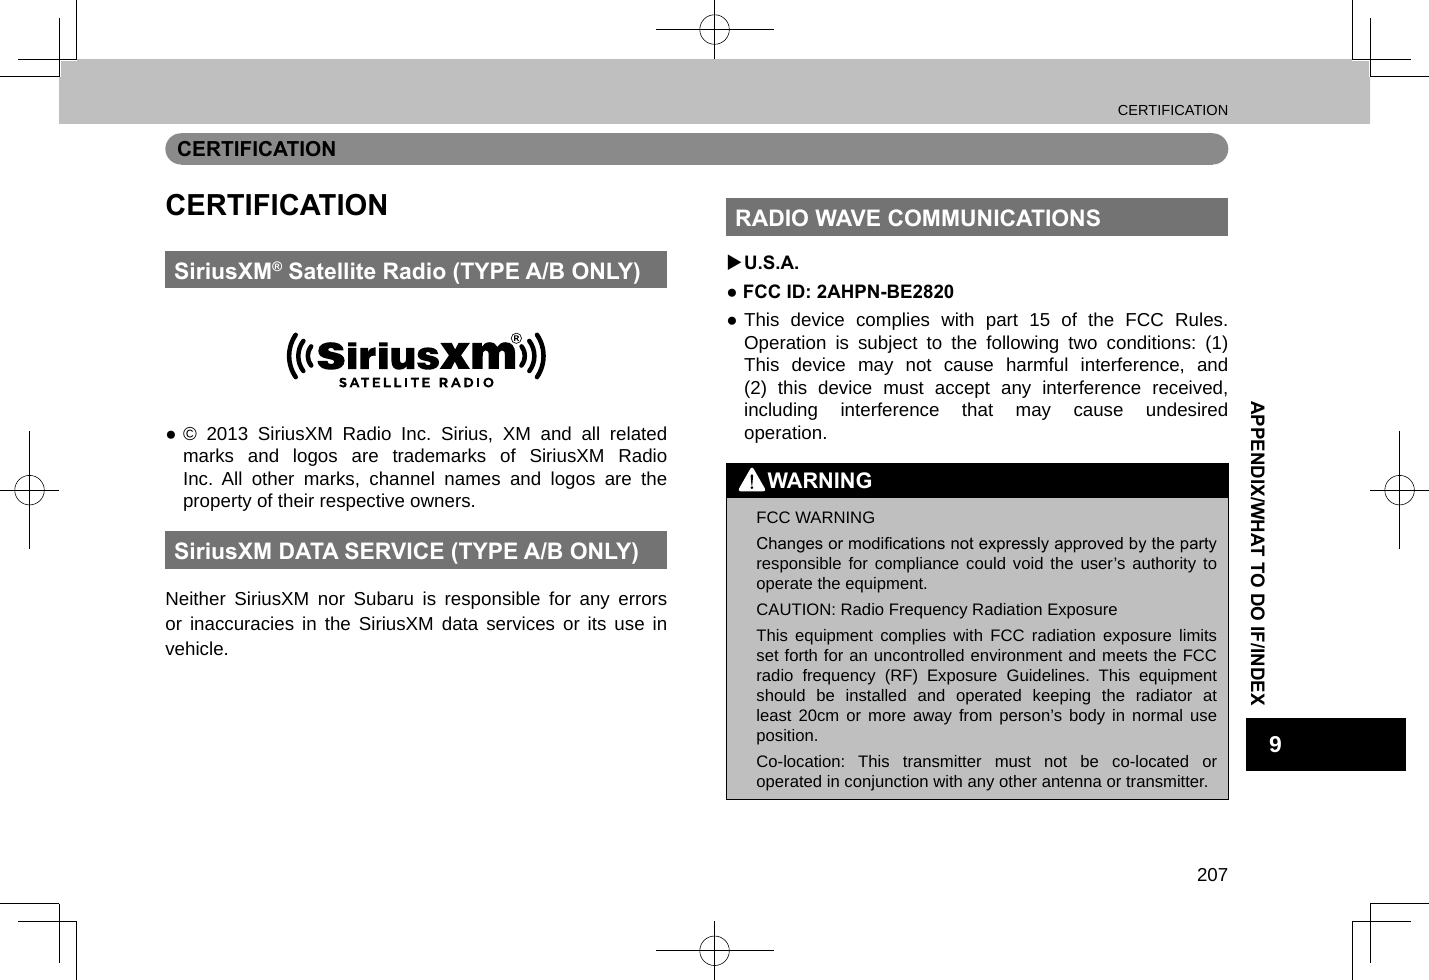 CERTIFICATION207APPENDIX/WHAT TO DO IF/INDEX9CERTIFICATIONCERTIFICATIONSiriusXM® Satellite Radio (TYPE A/B ONLY) ●© 2013 SiriusXM Radio Inc. Sirius, XM and all related marks and logos are trademarks of SiriusXM Radio Inc. All other marks, channel names and logos are the property of their respective owners.SiriusXM DATA SERVICE (TYPE A/B ONLY)Neither SiriusXM nor Subaru is responsible for any errors or inaccuracies in the SiriusXM data services or its use in vehicle.RADIO WAVE COMMUNICATIONS XU.S.A.● FCC ID: 2AHPN-BE2820 ●This device complies with part 15 of the FCC Rules. Operation is subject to the following two conditions: (1) This device may not cause harmful interference, and (2) this device must accept any interference received, including interference that may cause undesired operation.WARNING lFCC WARNINGChanges or modications not expressly approved by the party responsible for compliance could void the user’s authority to operate the equipment. lCAUTION: Radio Frequency Radiation ExposureThis equipment complies with FCC radiation exposure limits set forth for an uncontrolled environment and meets the FCC radio frequency (RF) Exposure Guidelines. This equipment should be installed and operated keeping the radiator at least 20cm or more away from person’s body in normal use position. lCo-location: This transmitter must not be co-located or operated in conjunction with any other antenna or transmitter.